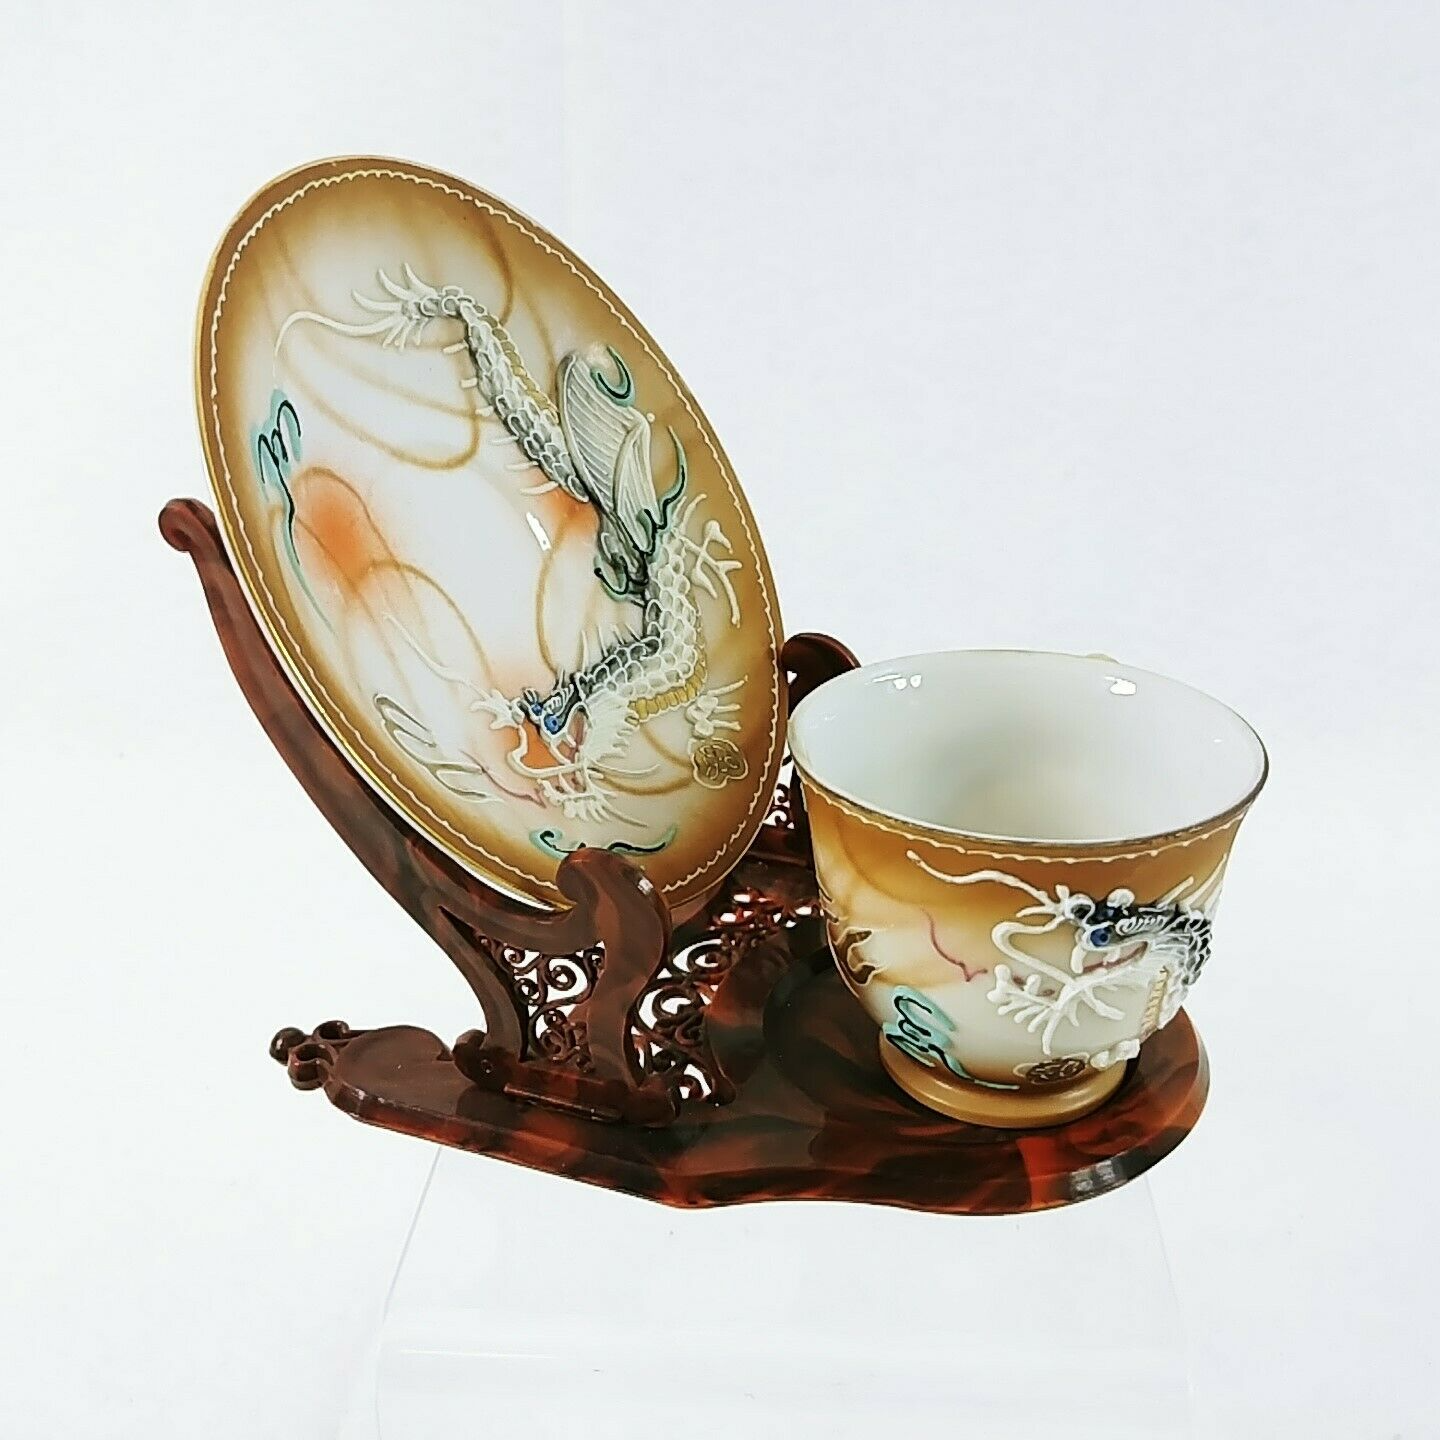 Asian Dragonware Tea Cup Saucer Demitasse Moriage Design with Easel Stand